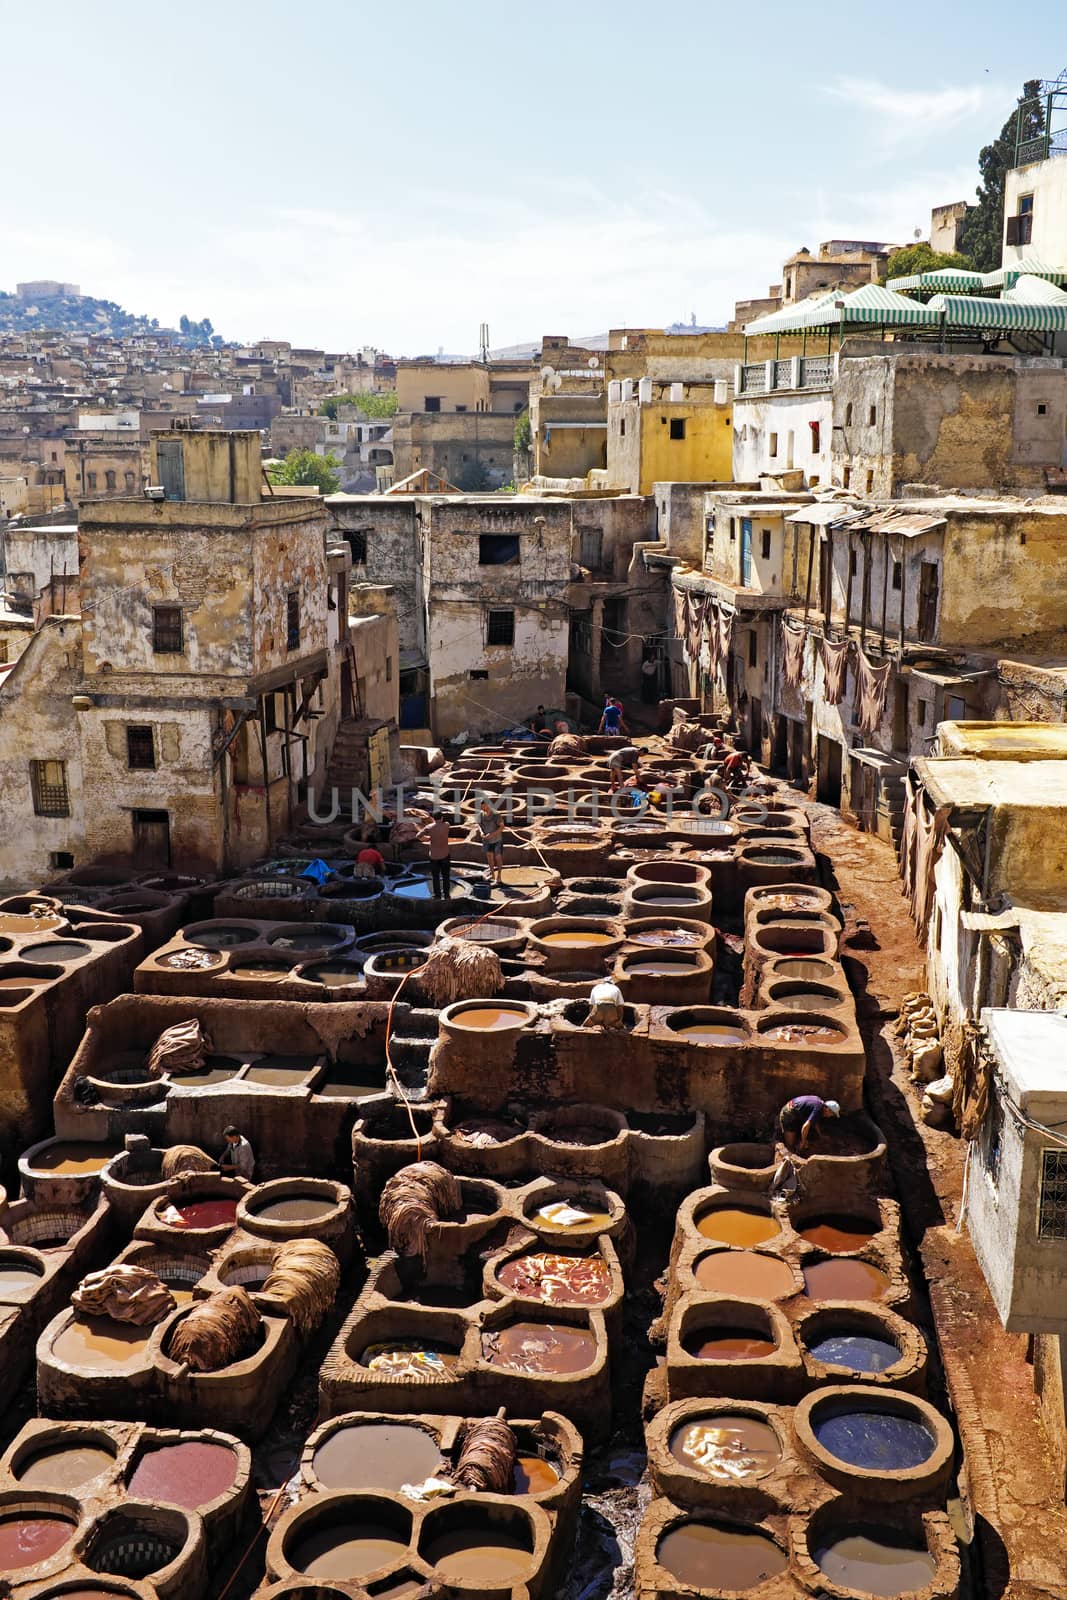 Tanners working leather in the old tannery of Fes, Morocco by devy